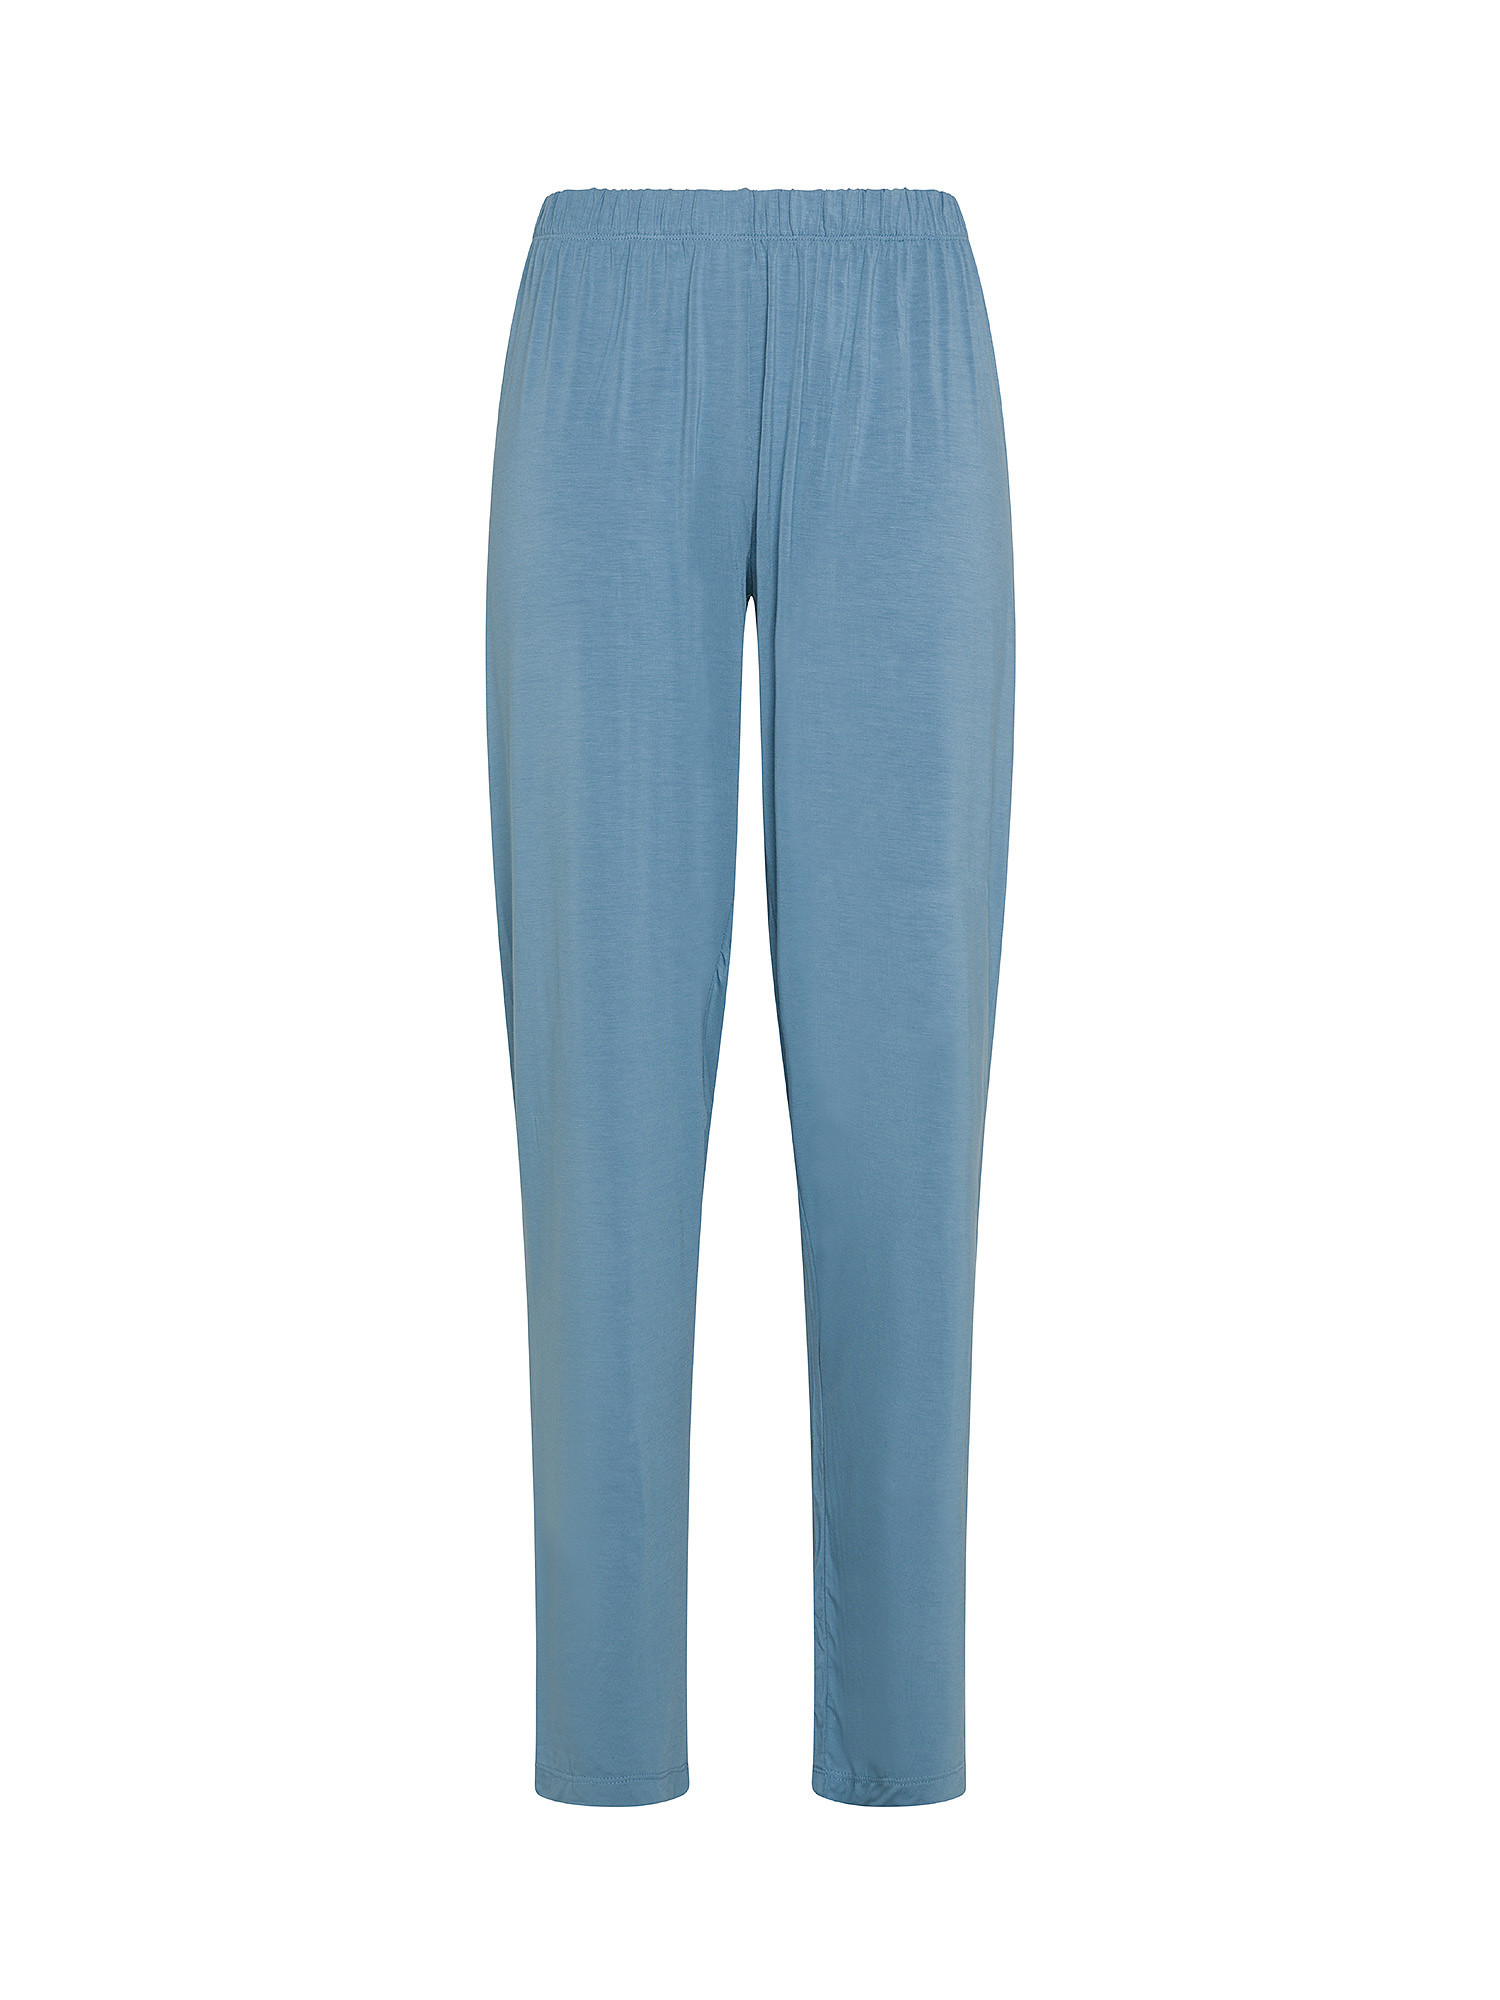 Solid color bamboo viscose trousers, Light Blue, large image number 0